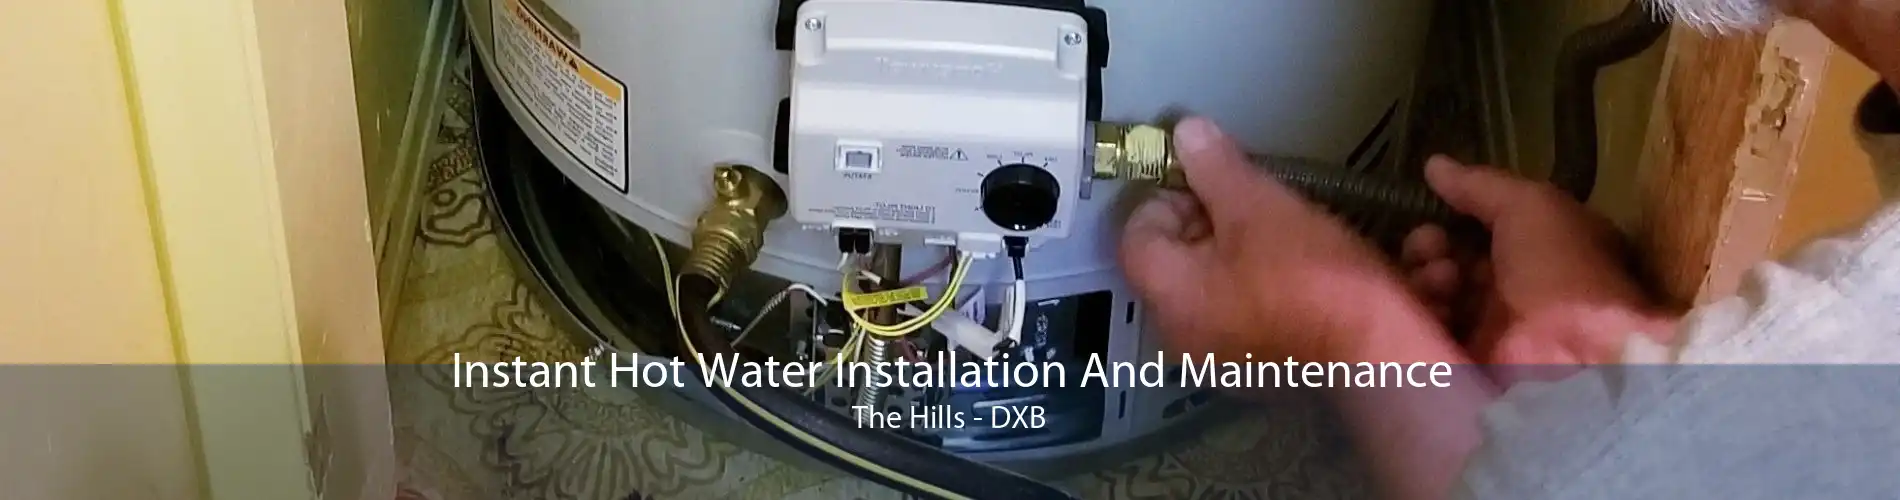 Instant Hot Water Installation And Maintenance The Hills - DXB